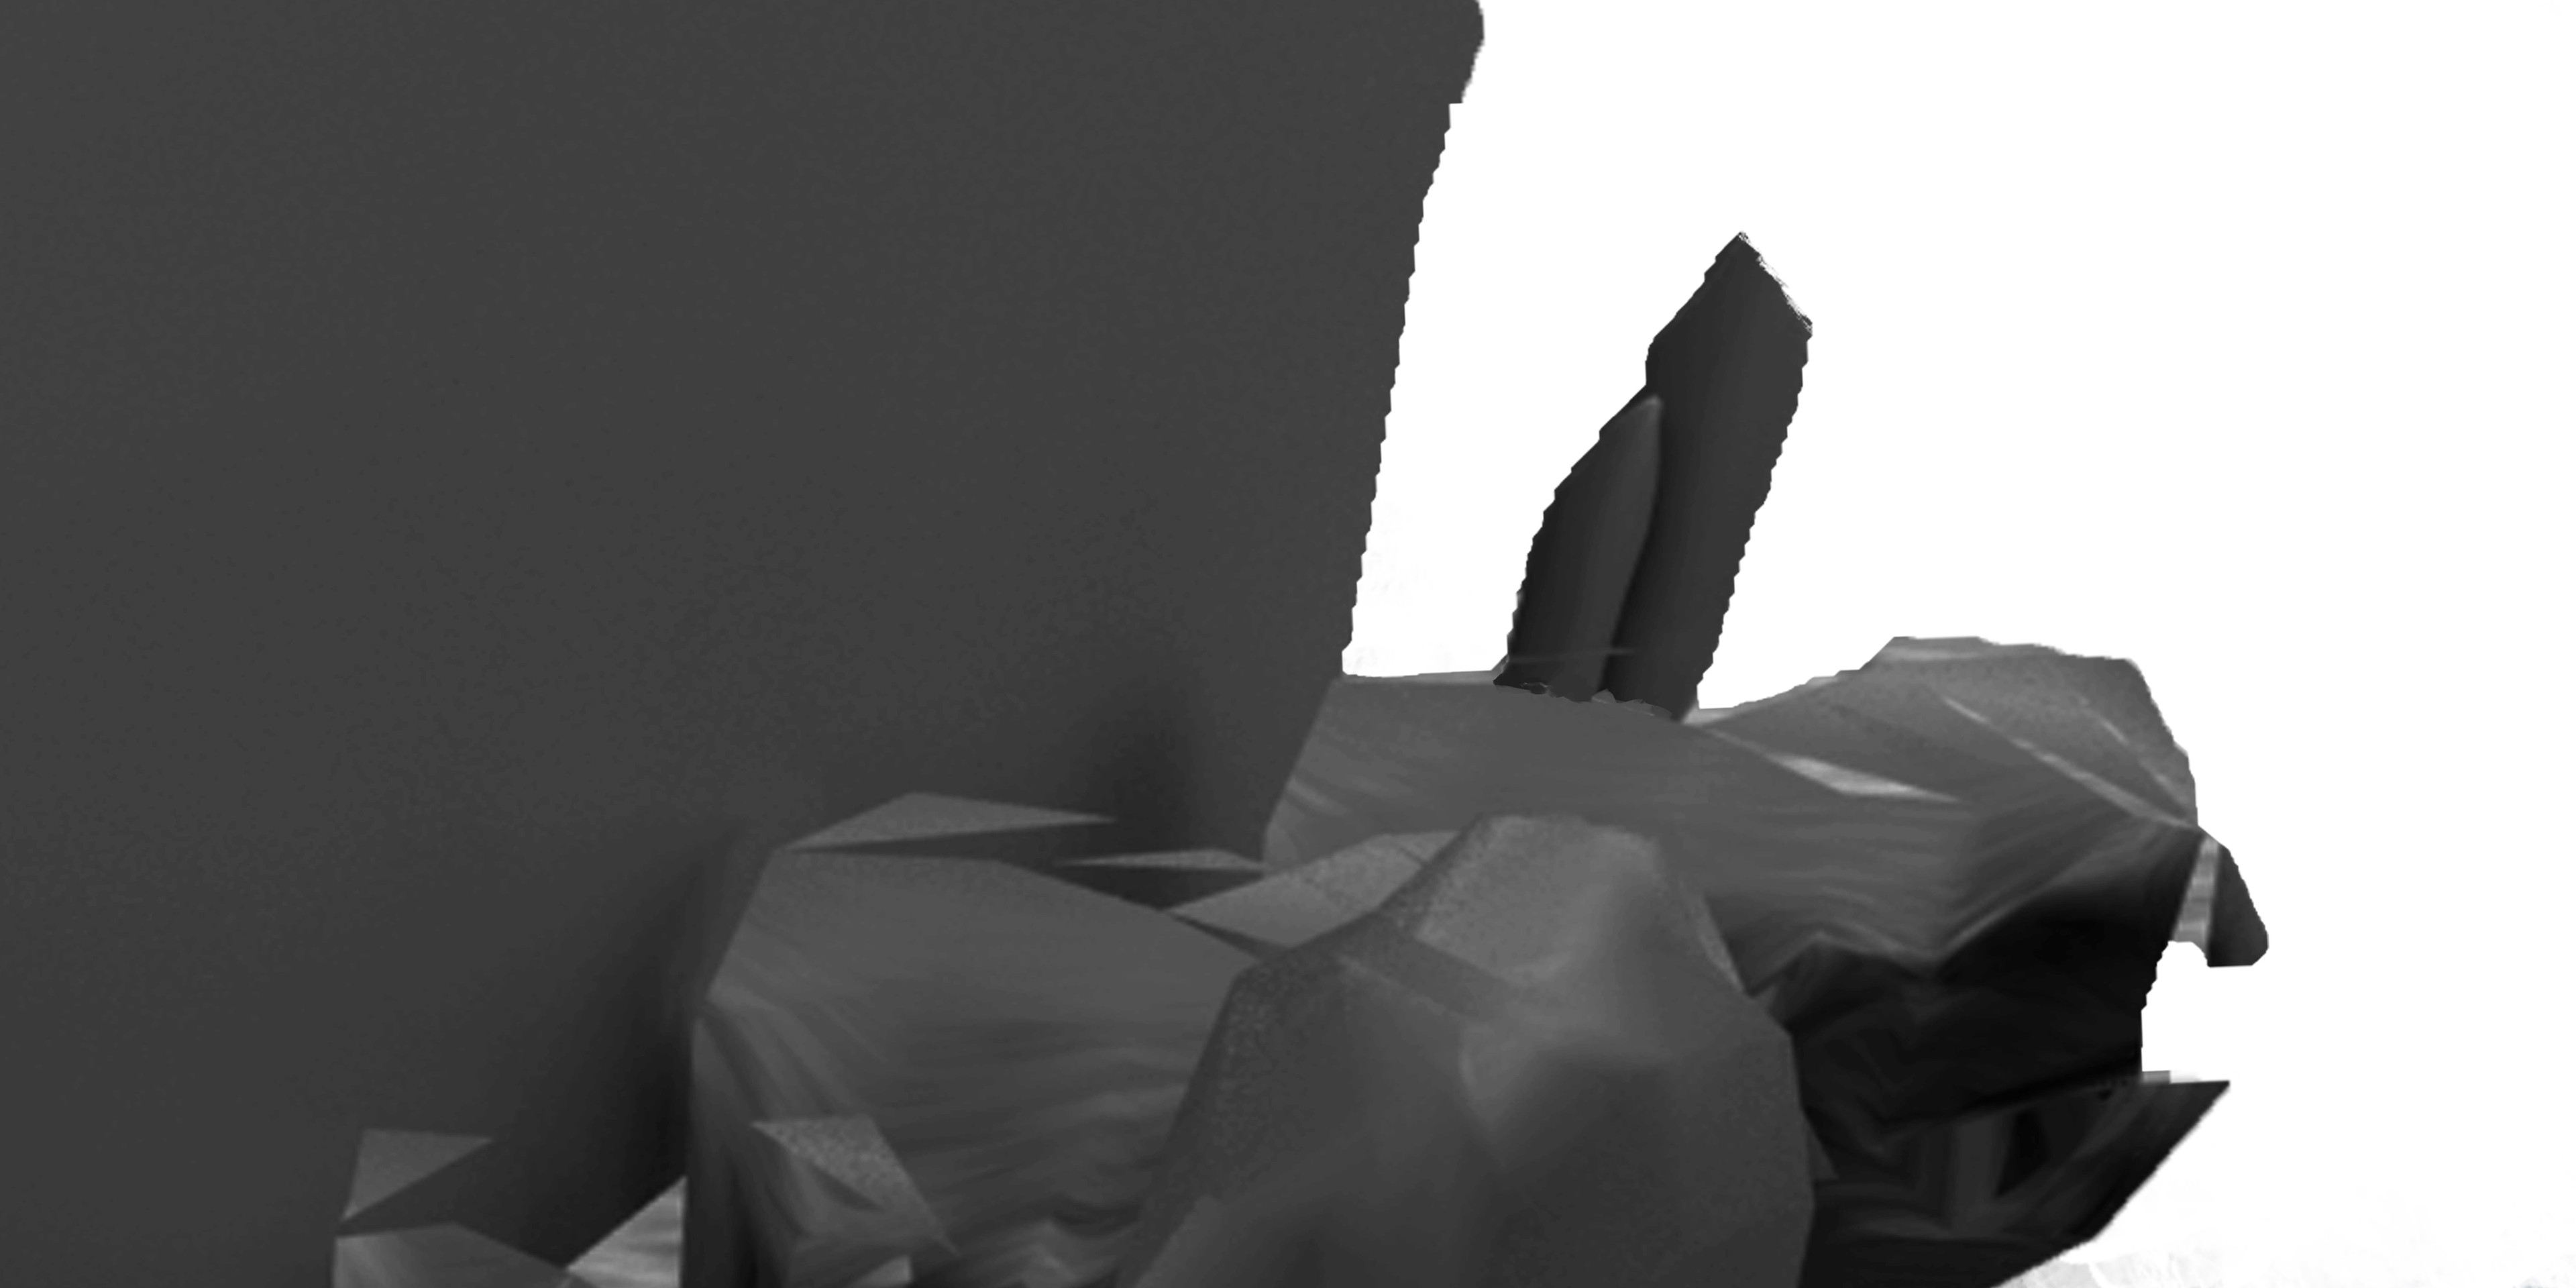 The terrible 3D base I modelled.
I'm hoping to get better at this step.